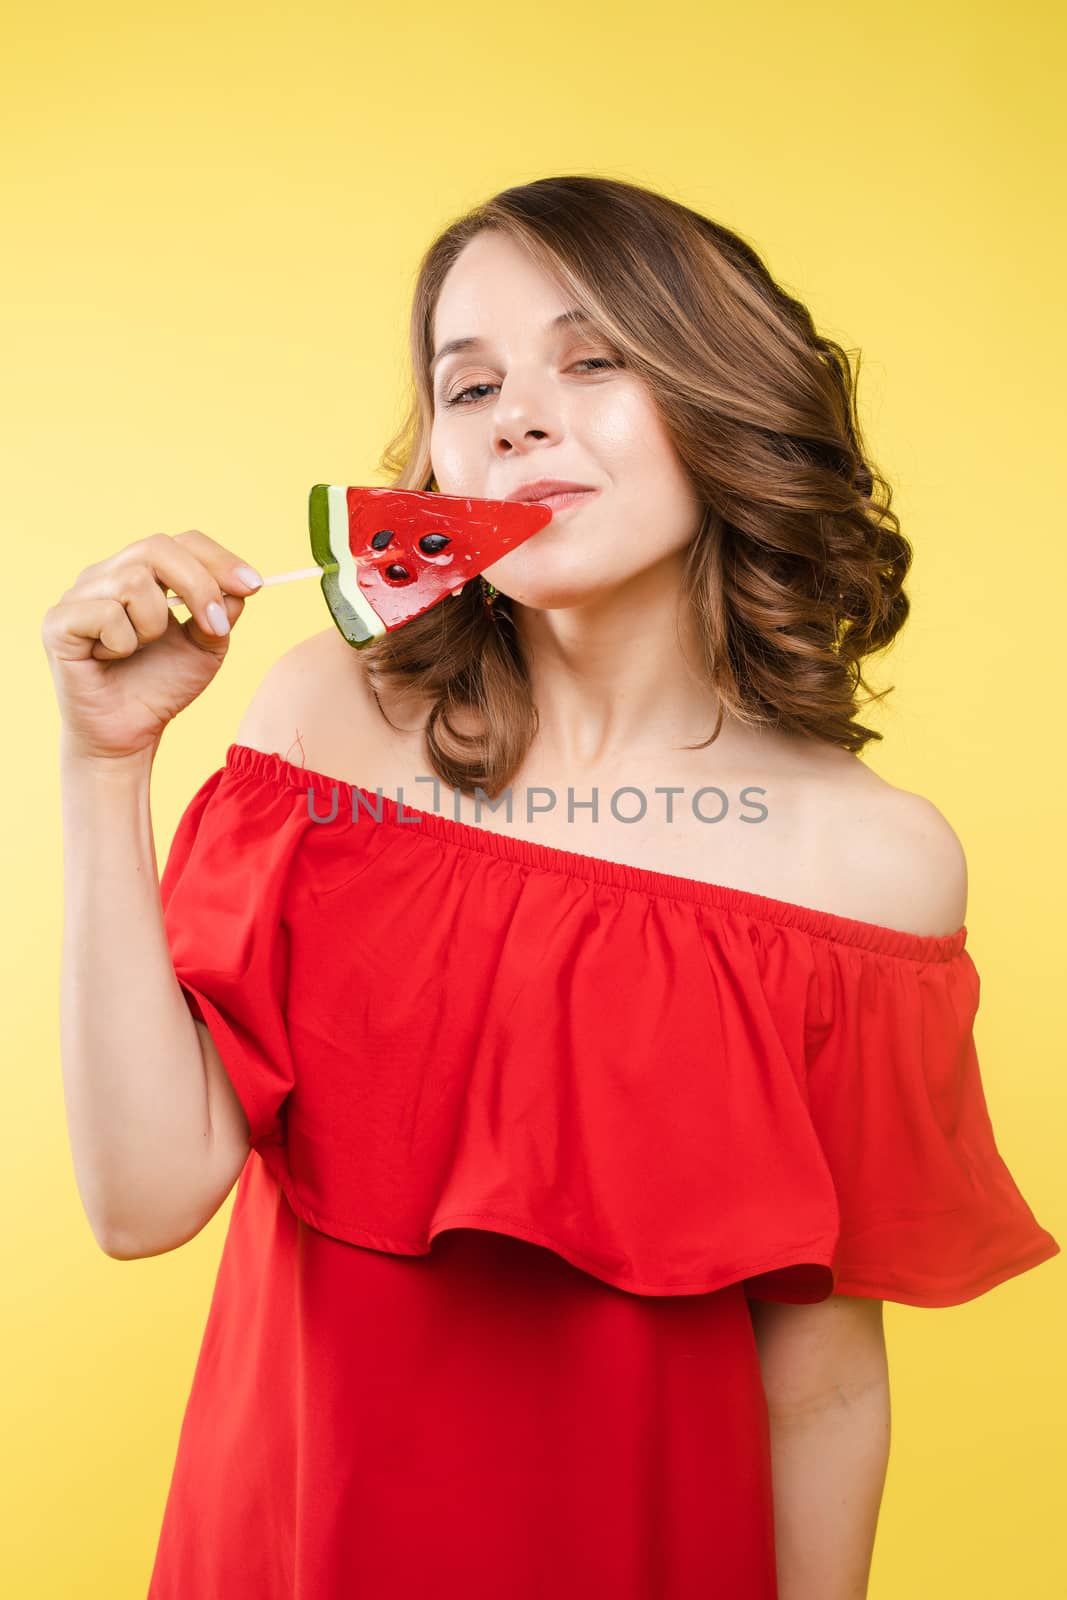 Fashionable young woman with lolipop in her hands on background by StudioLucky